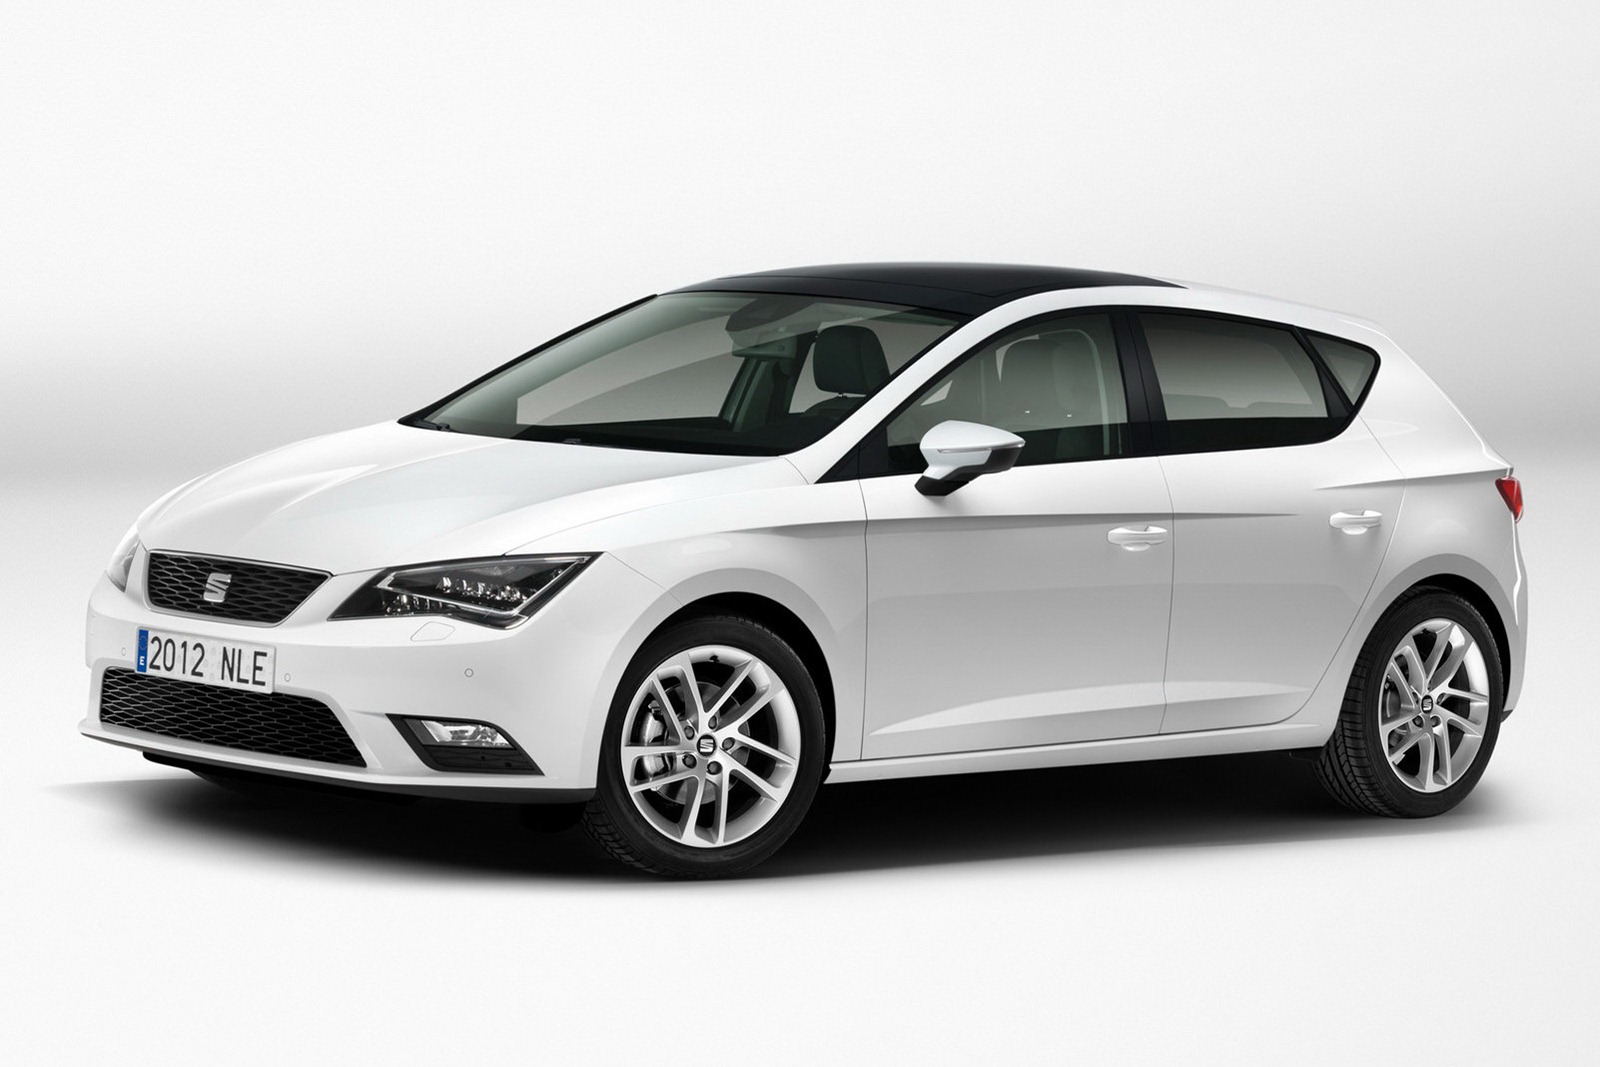 seat-leon-official-pictures-leaked-photo-gallery_1.jpg